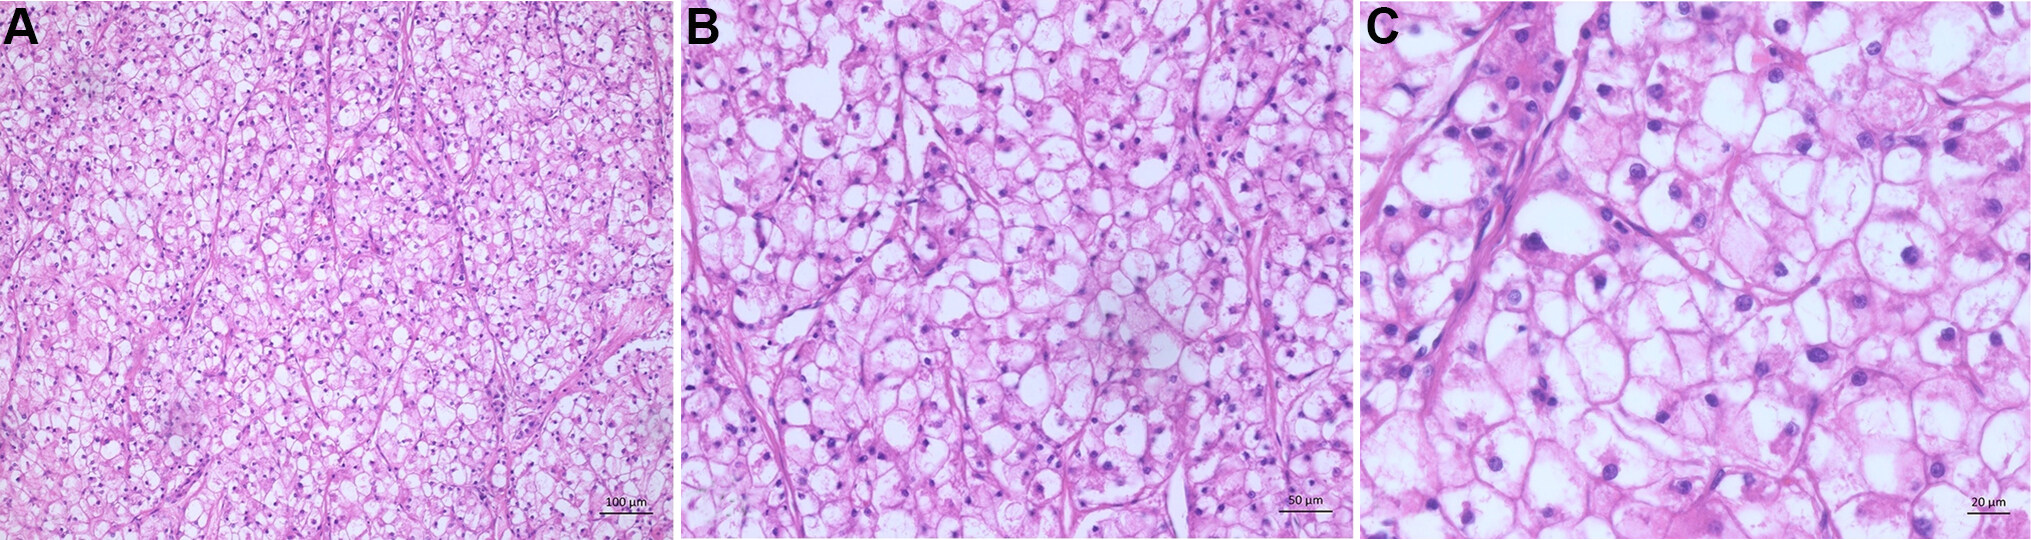 Histopathology of hepatocellular carcinoma - when and what